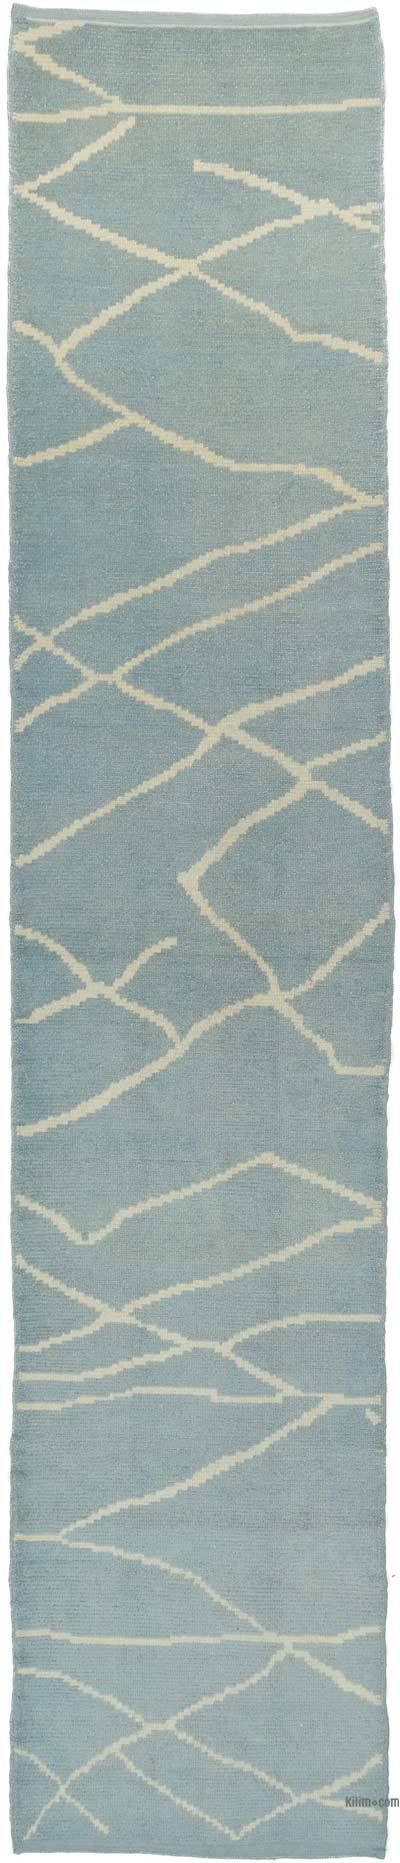 Blue New Moroccan Style Hand-Knotted Runner - 2' 11" x 14' 4" (35 in. x 172 in.)